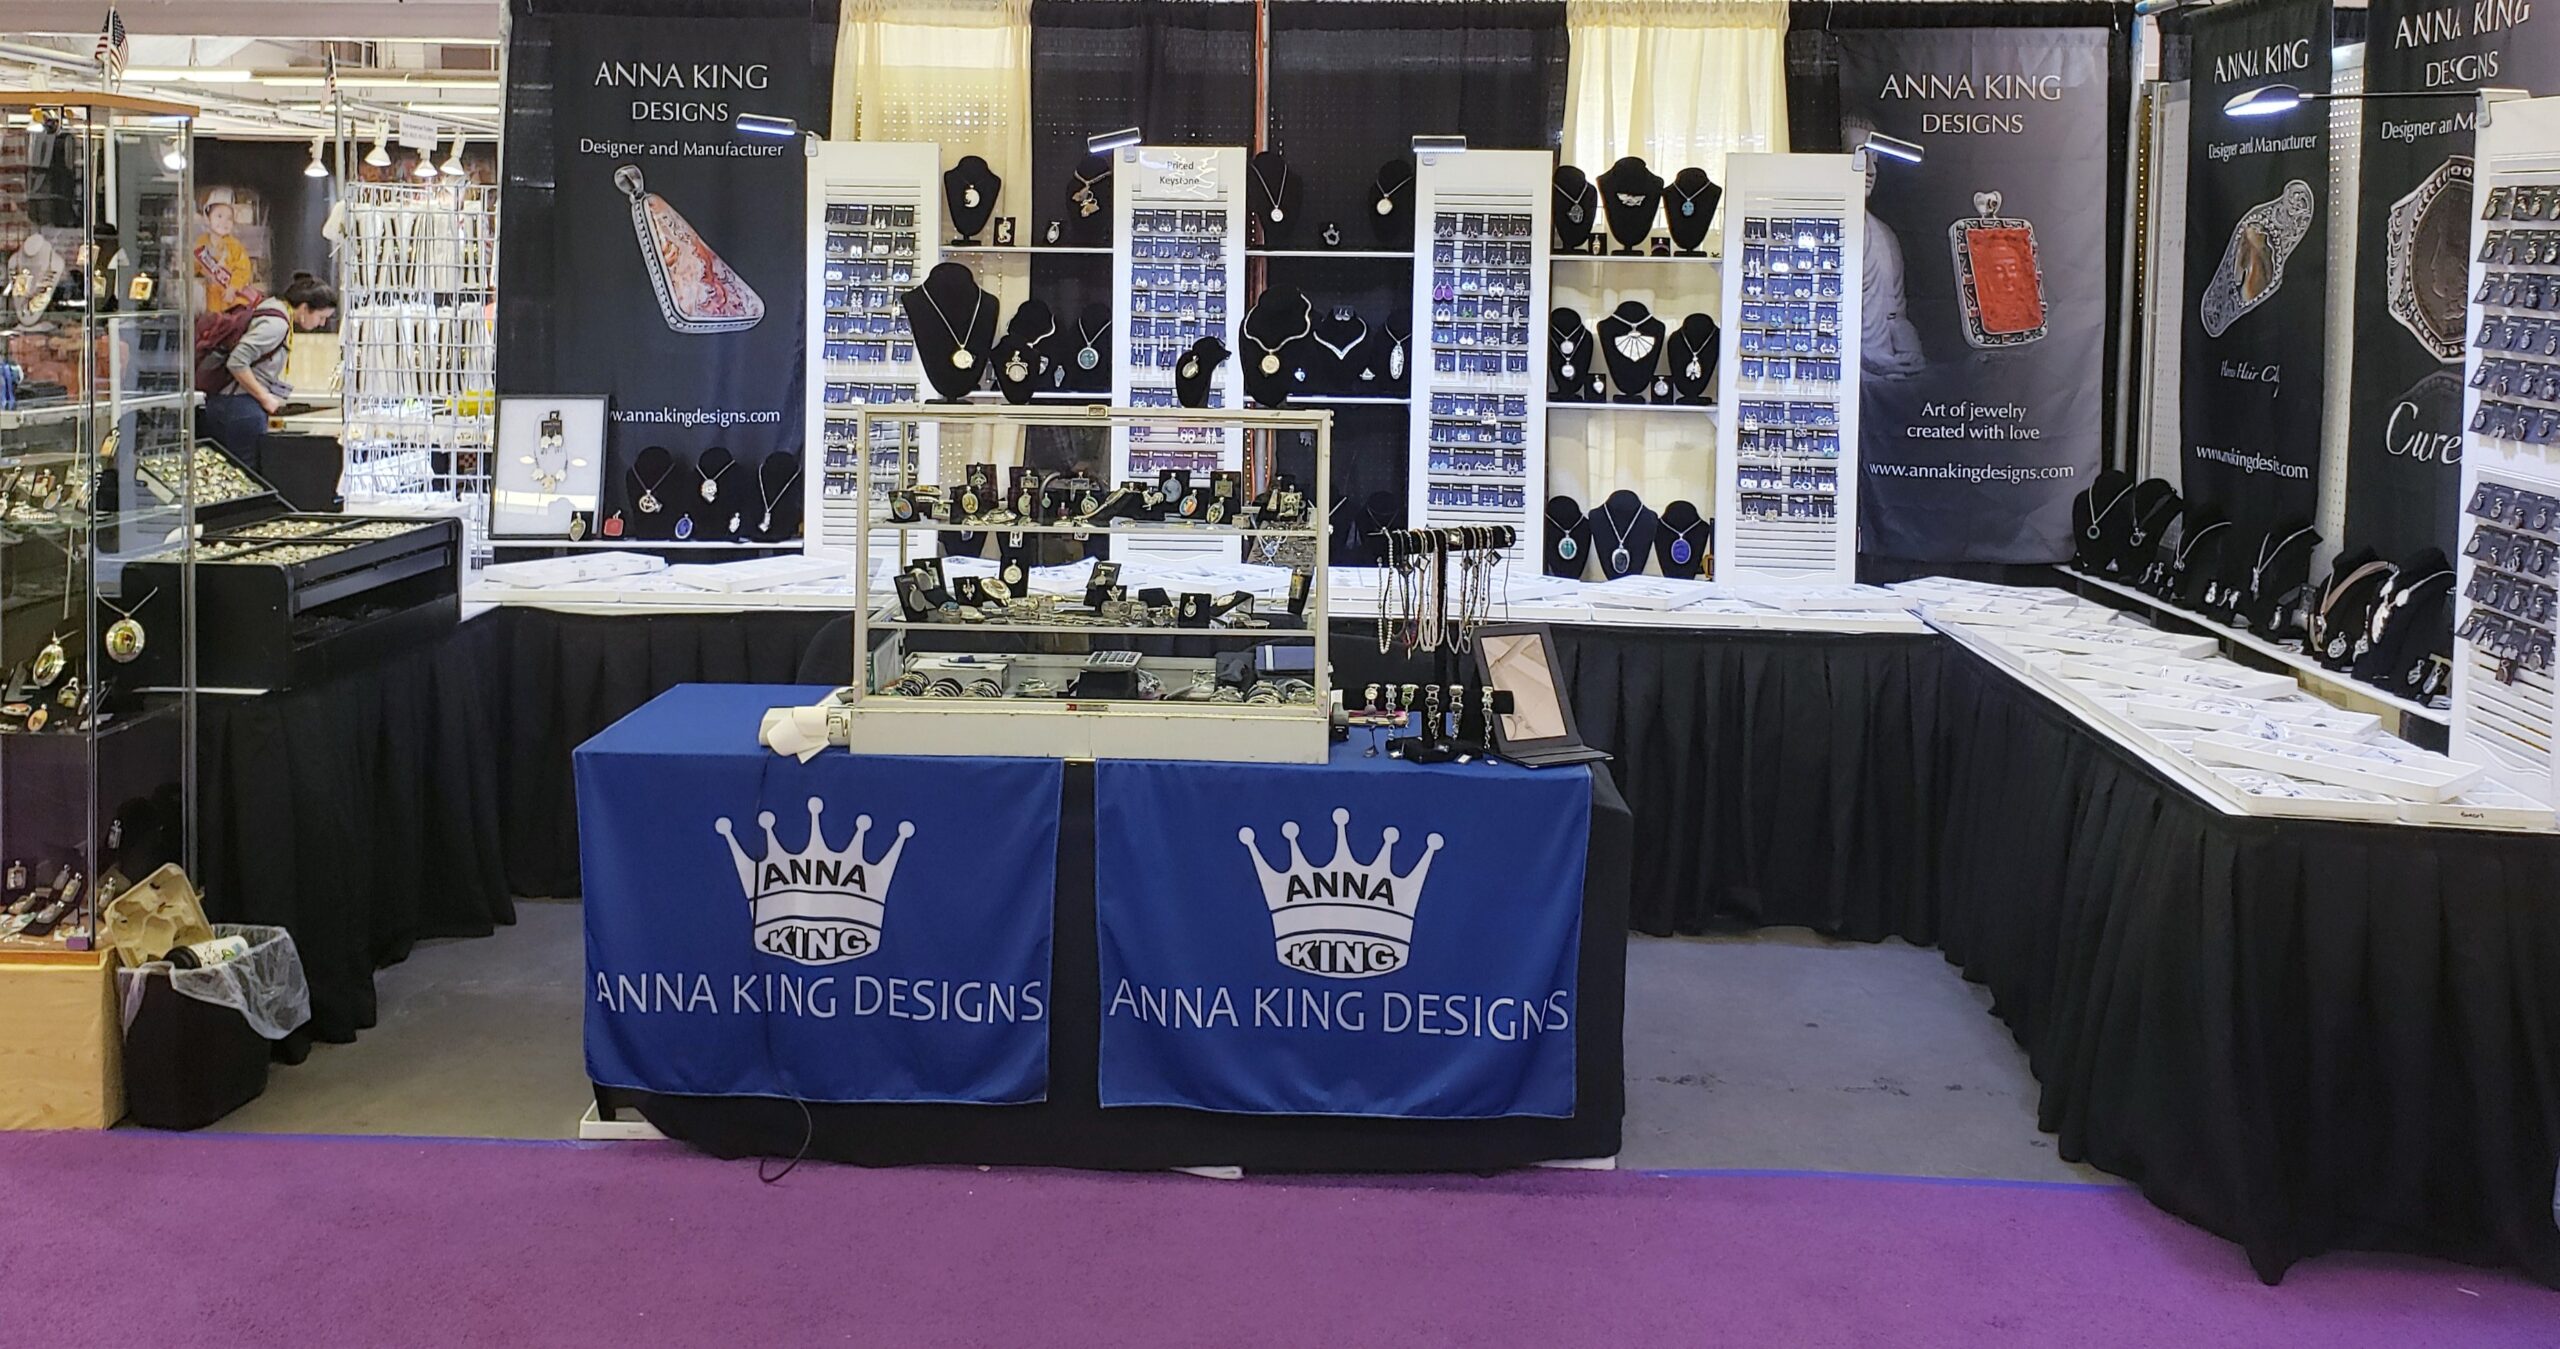 https://www.annakingdesigns.com/wp-content/uploads/2023/02/Booth-Photo-adjusted1-scaled.jpg